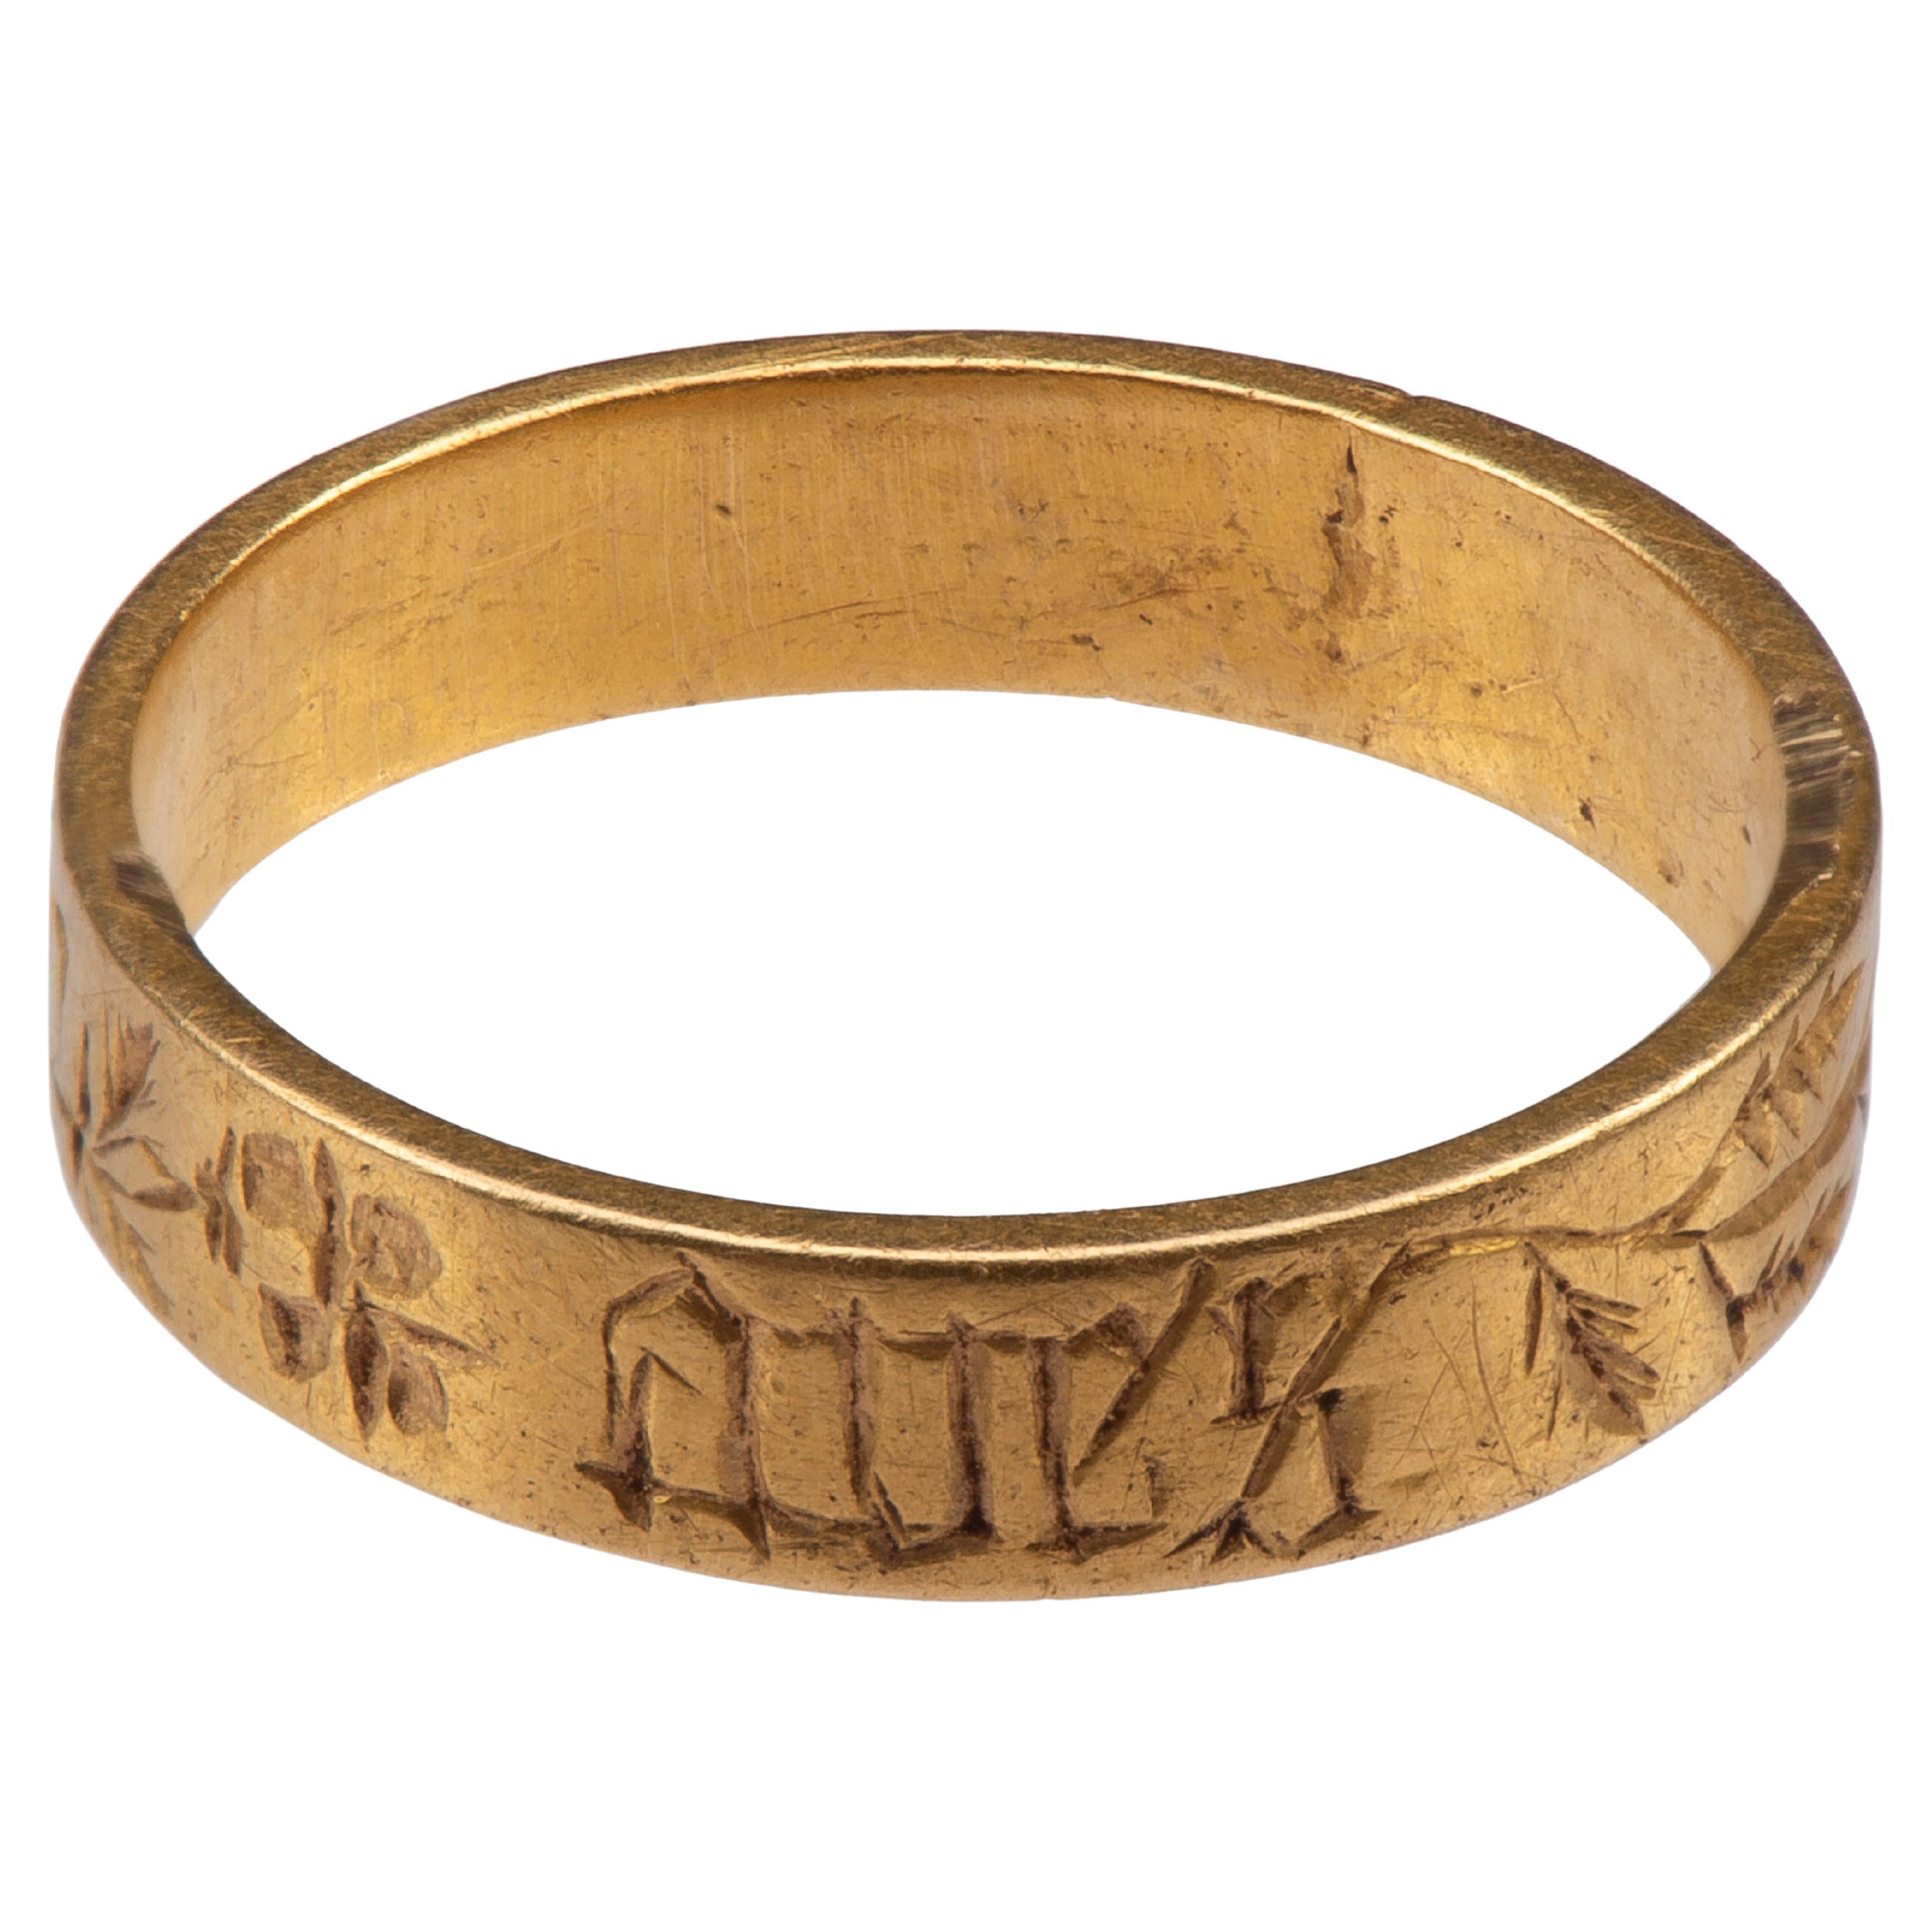 Antique English Gold Band 'Posey' Ring